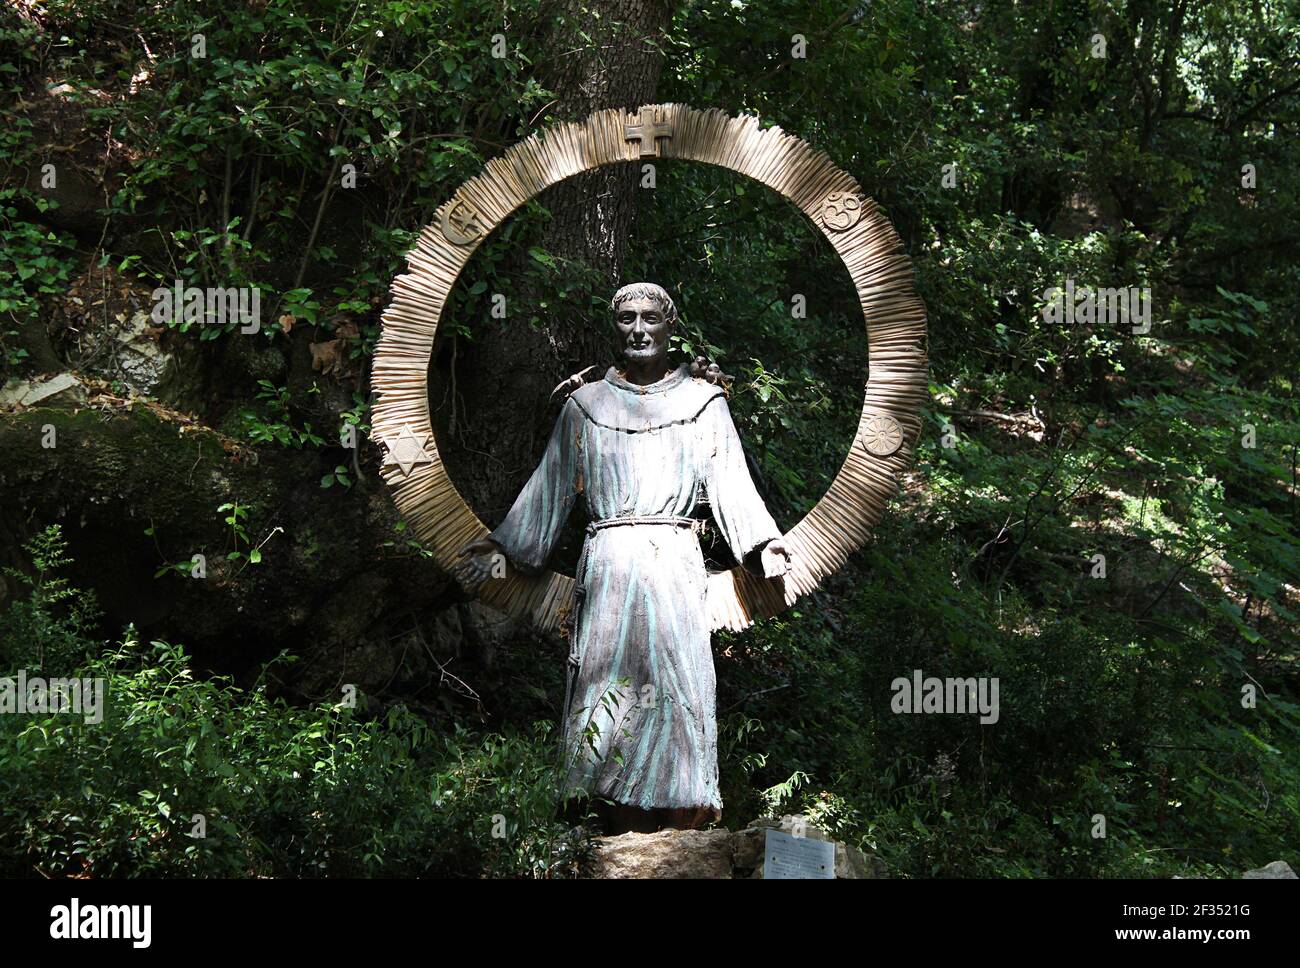 ASSISI, ITALY - JUNE 29, 2014: The statue of St. Francis of Universal Love (S. Francesco dell'Amore Universale) at Eremo dell Carceri made by Sandro D Stock Photo